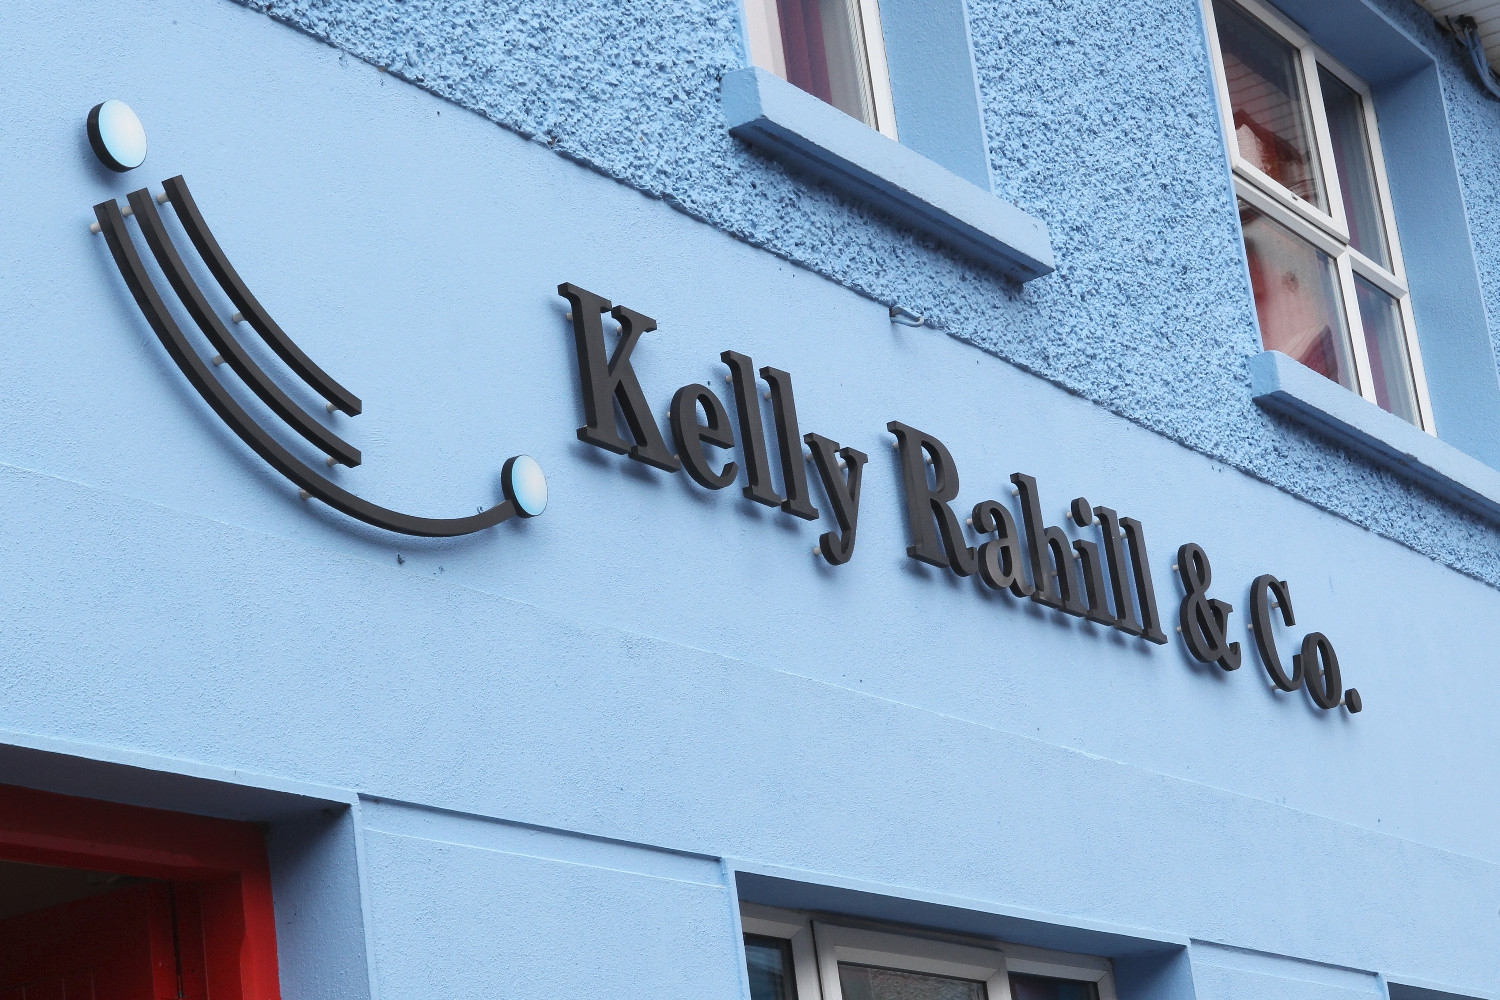 Kelly Rahill Sign 2